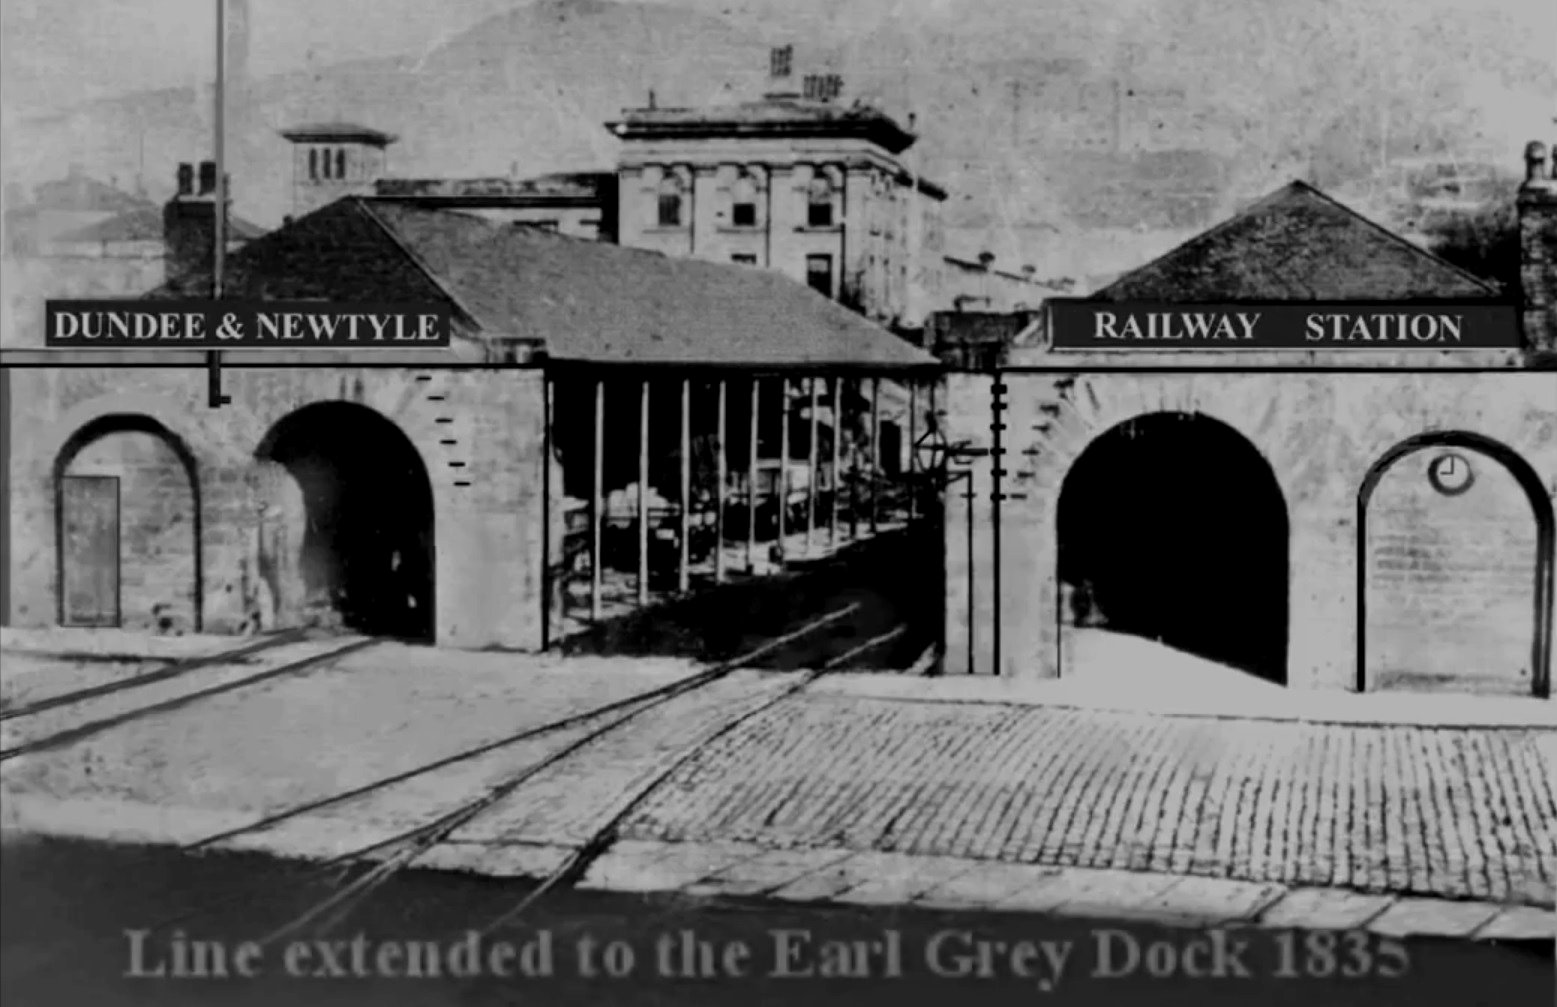 Dundee to Newtyle Railway - Ward Road Station.